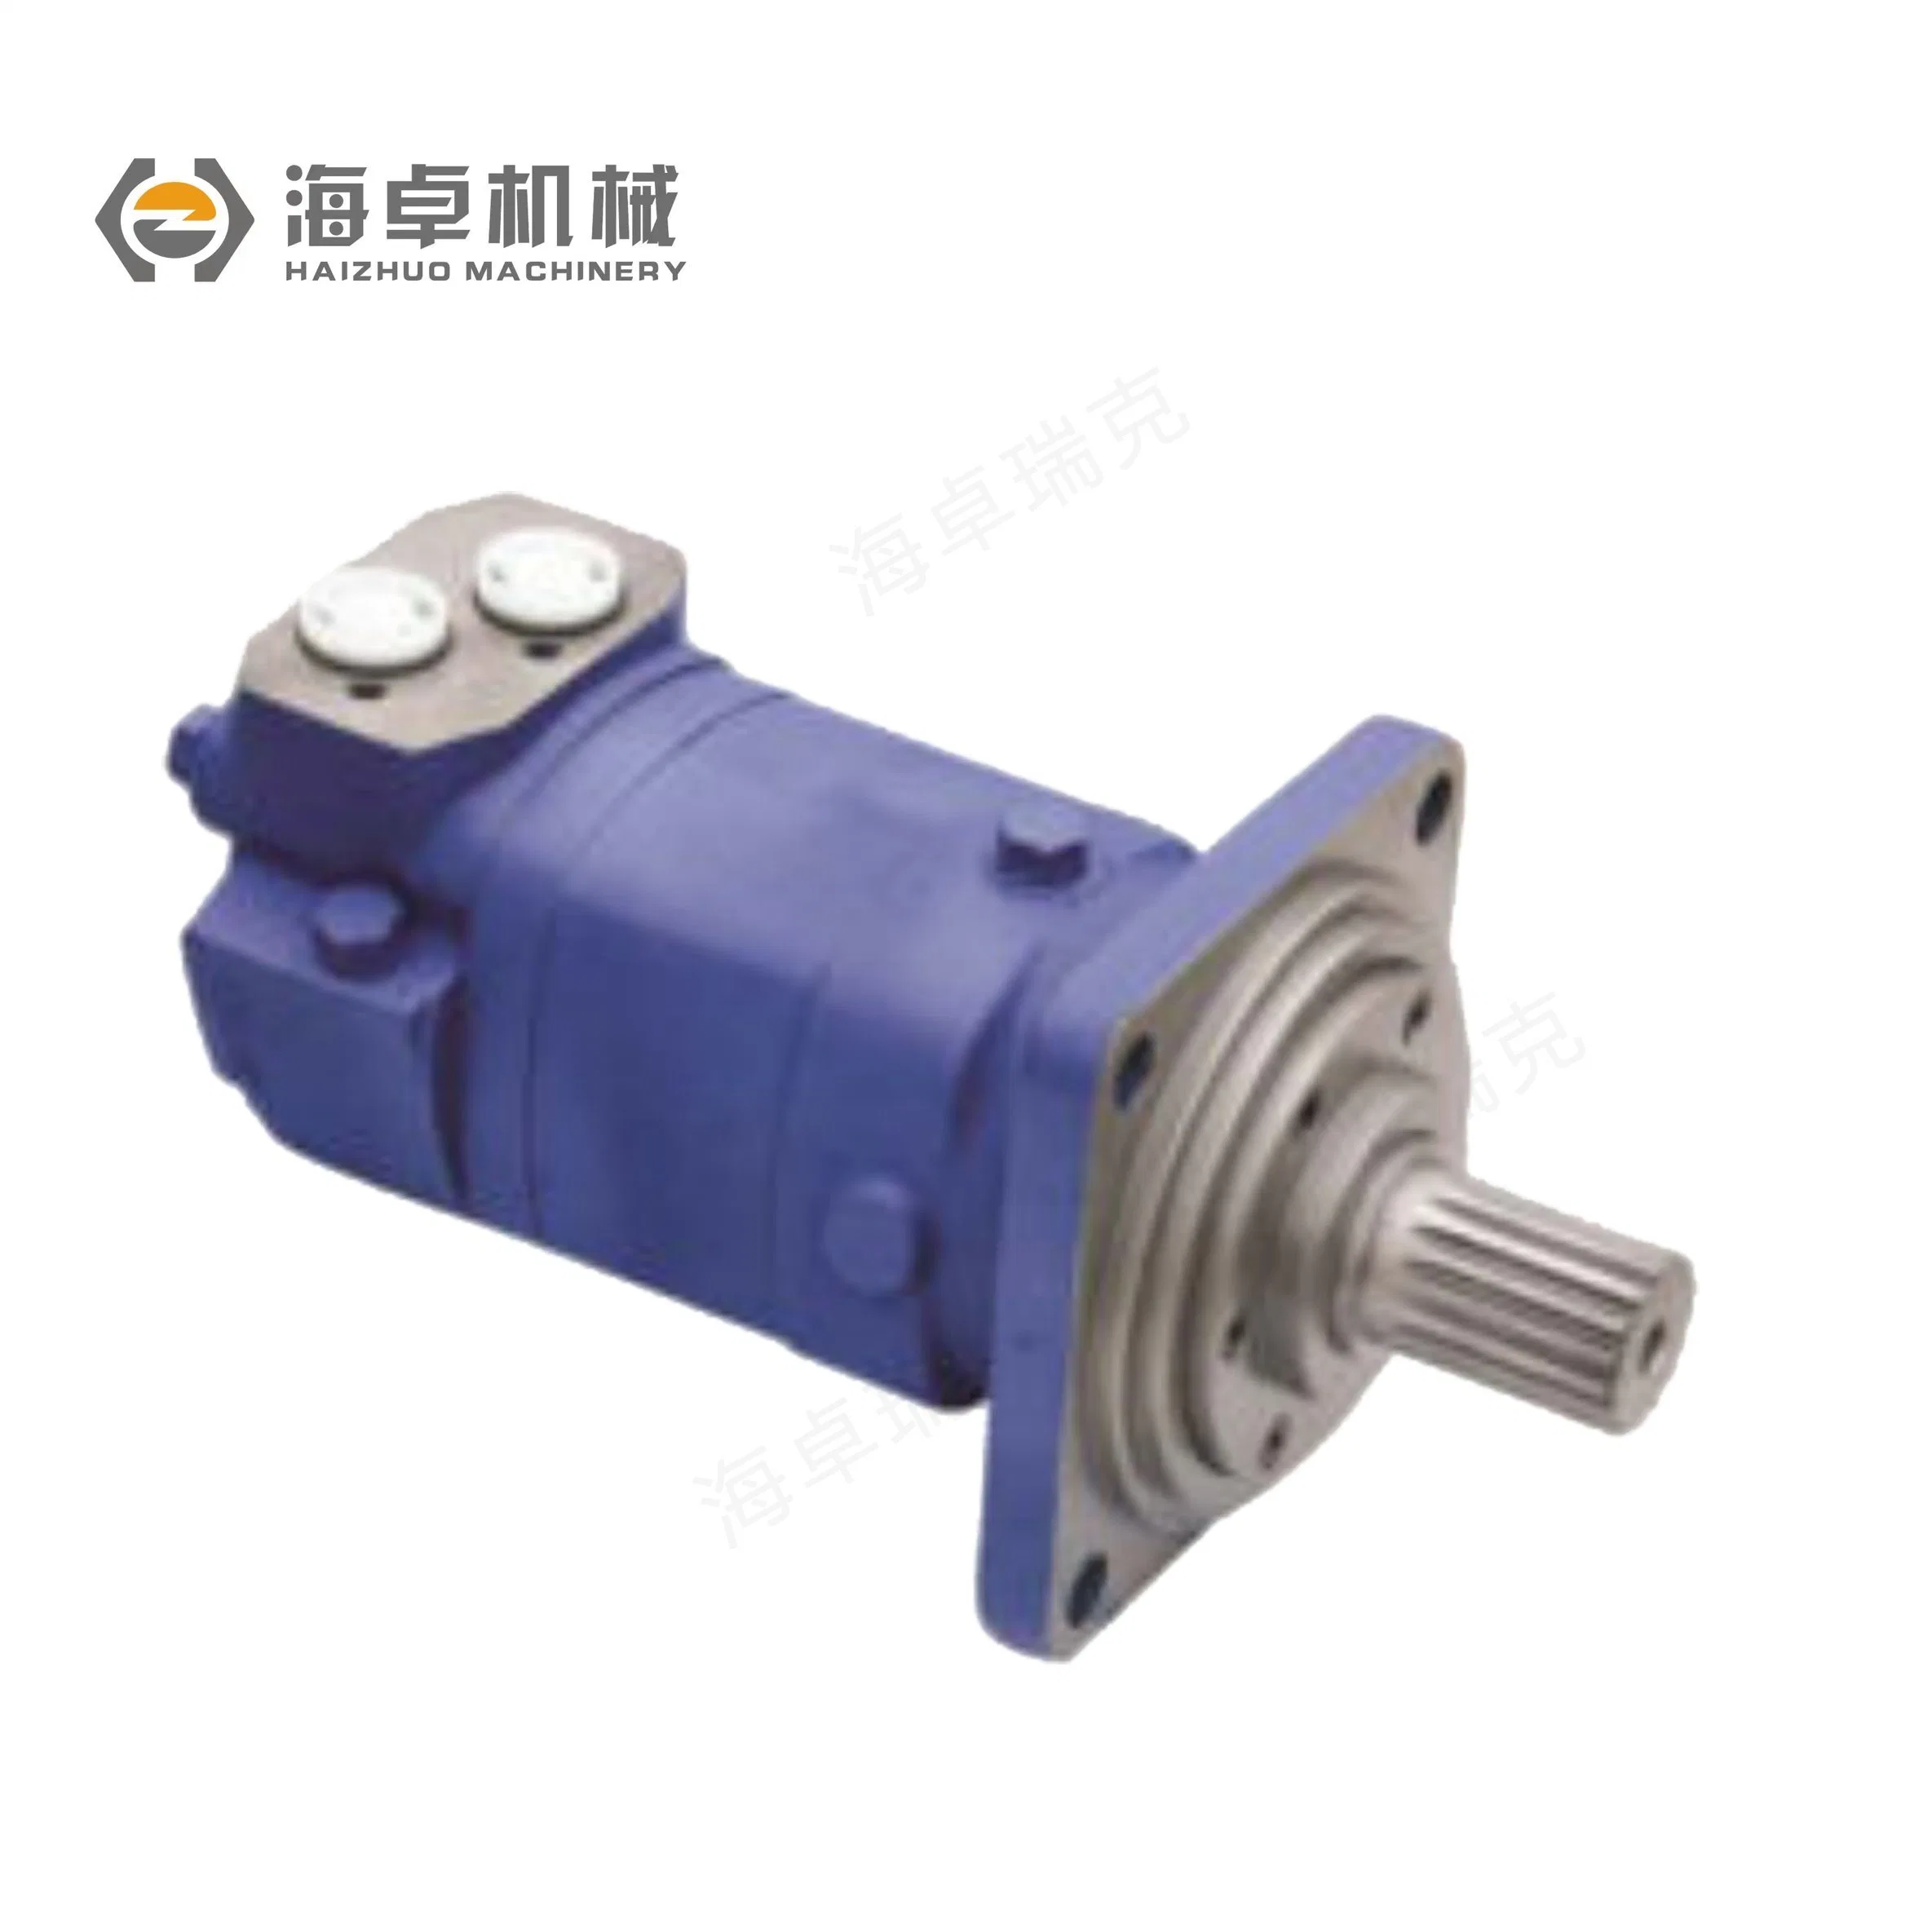 Bm6-310 High Torque Hydraulic Cycloid Motor Outer Connection for Large Special Vehicles